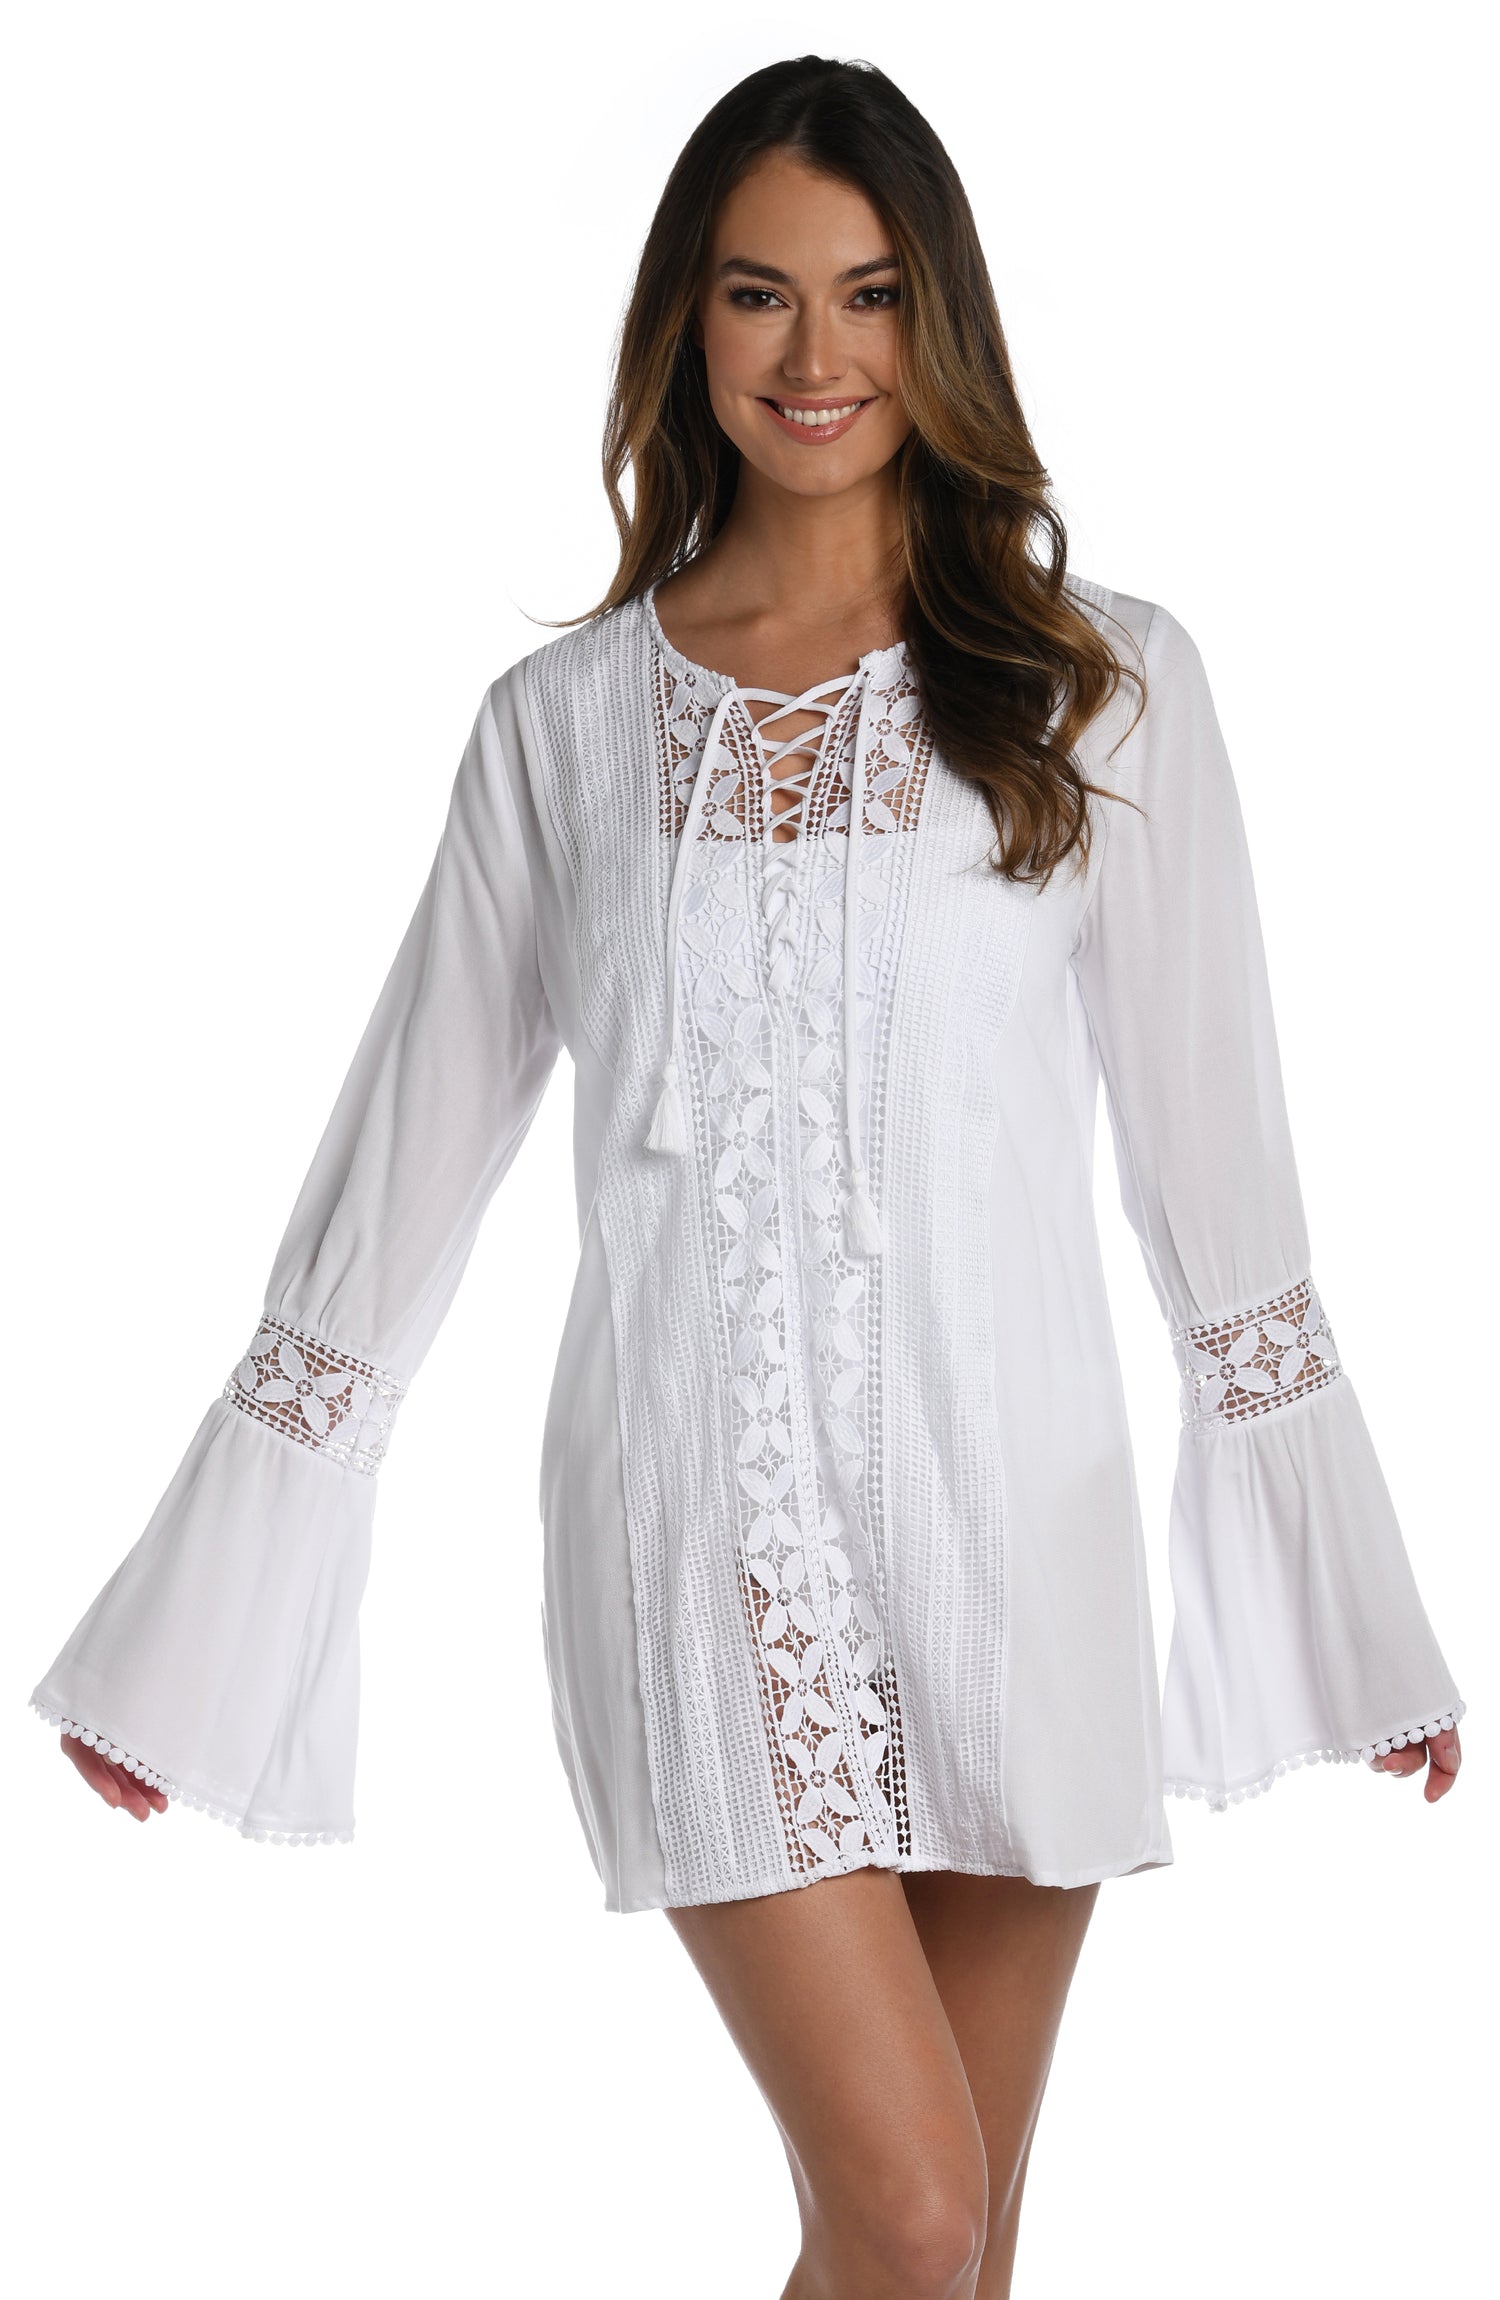 Model is wearing a crochet detailed pattern on this white v-neck tunic cover up from out Coastal Covers collection!